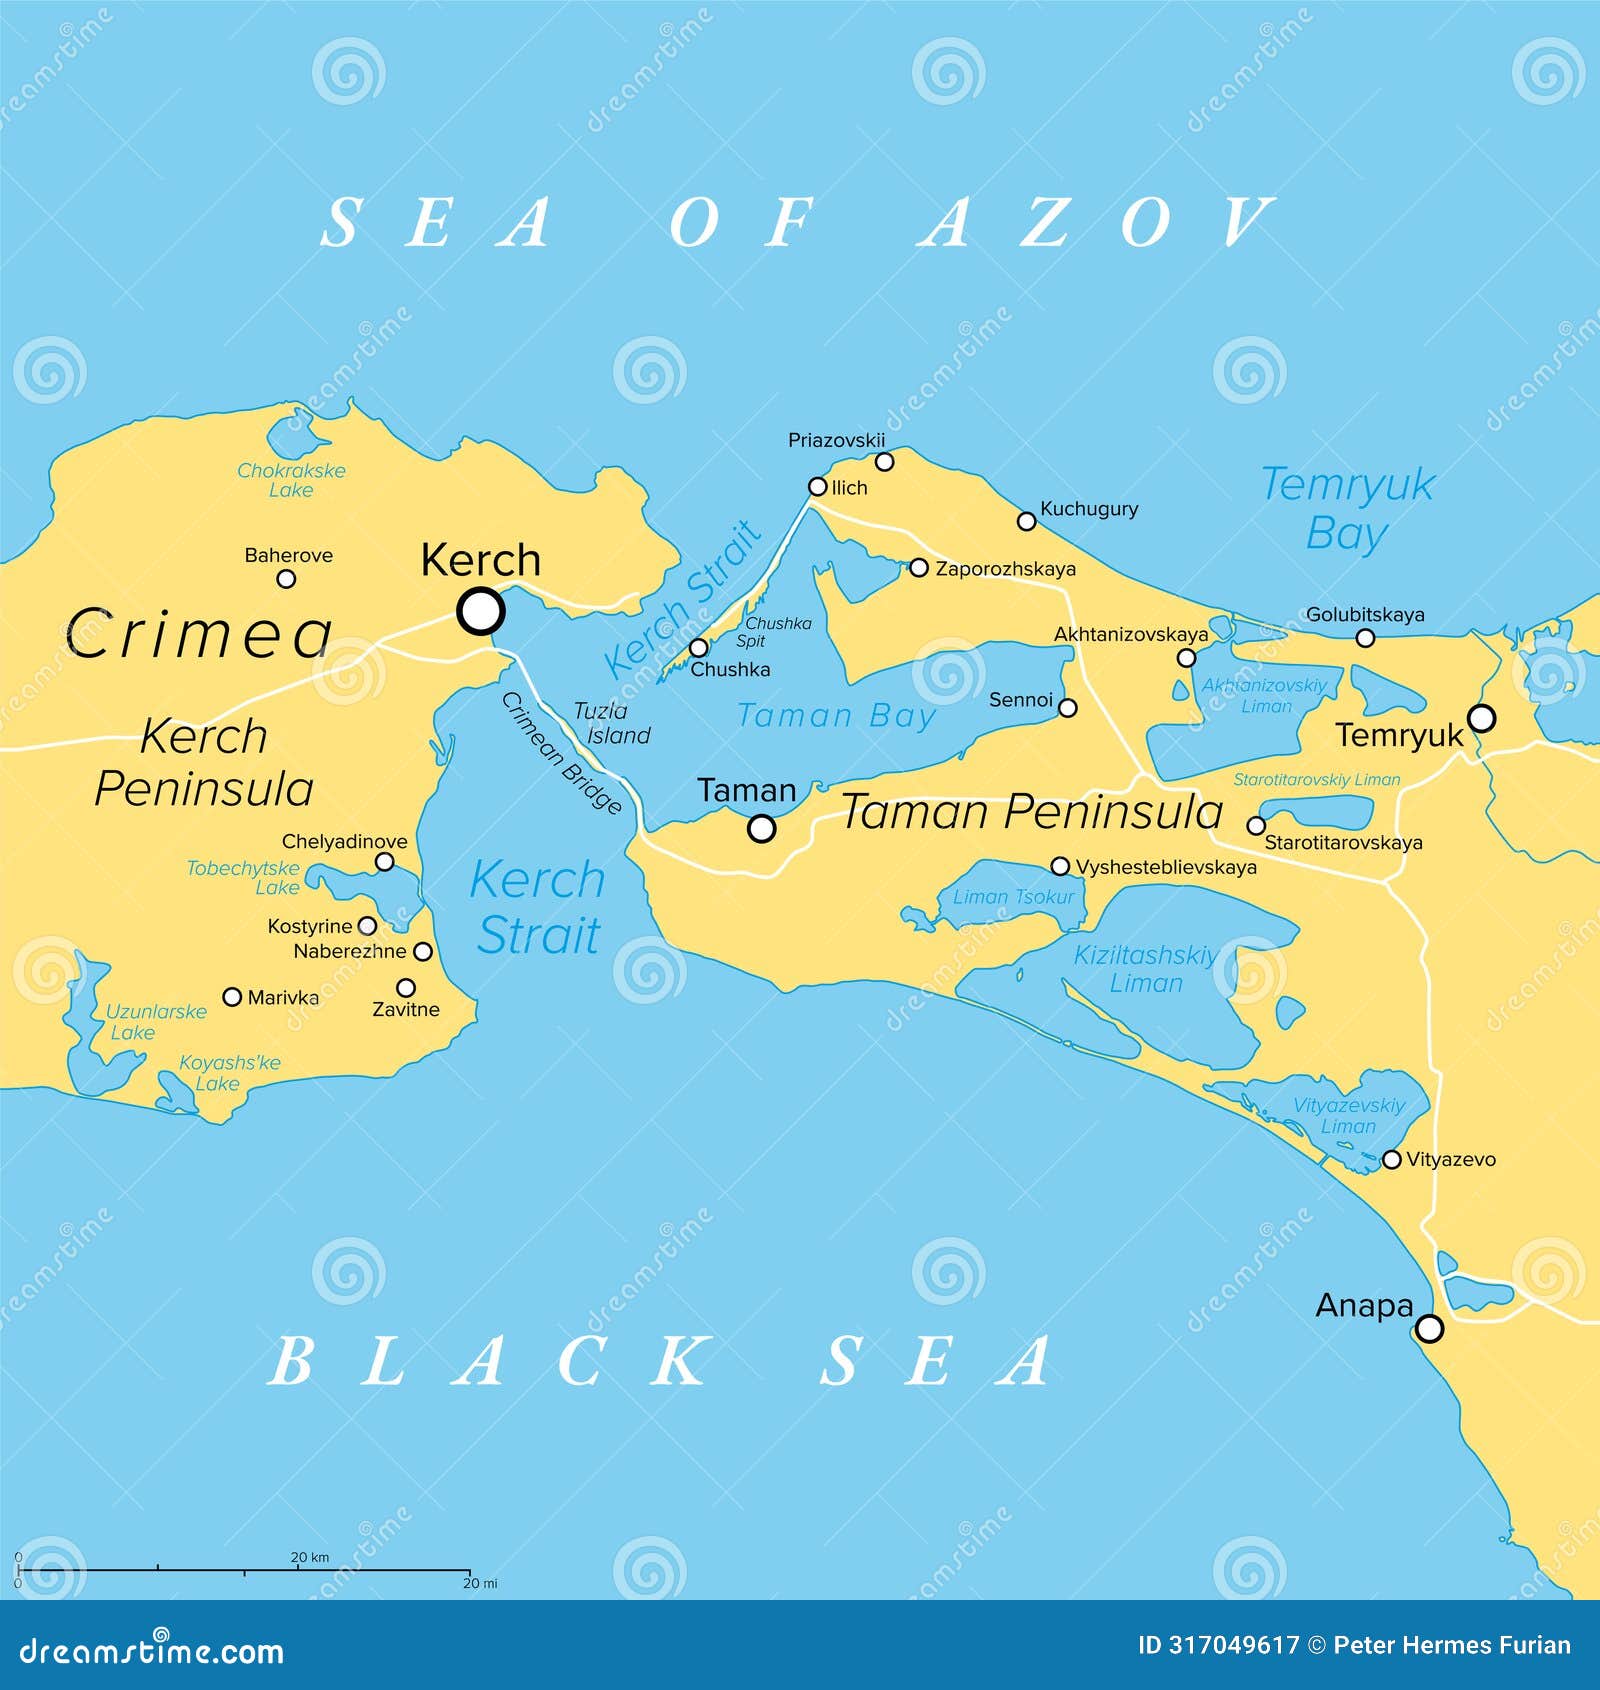 kerch strait in eastern europe, connecting black sea and sea of azov, political map